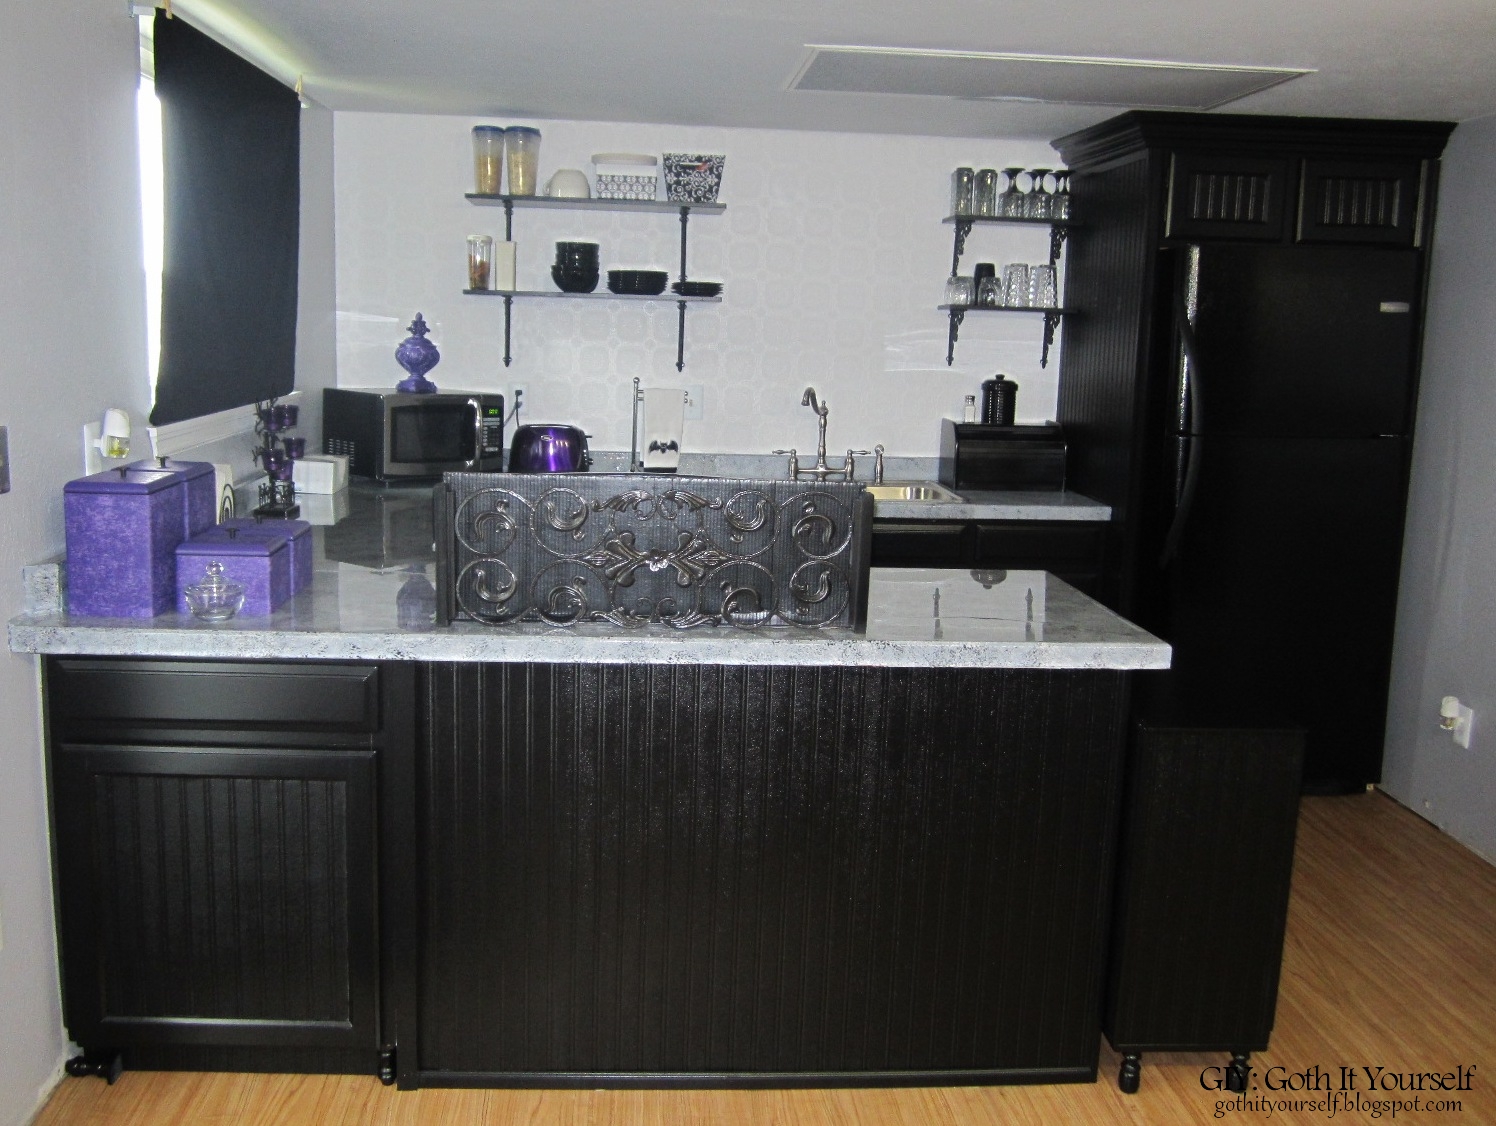 Giy Goth It Yourself Kitchen Makeover The Reveal